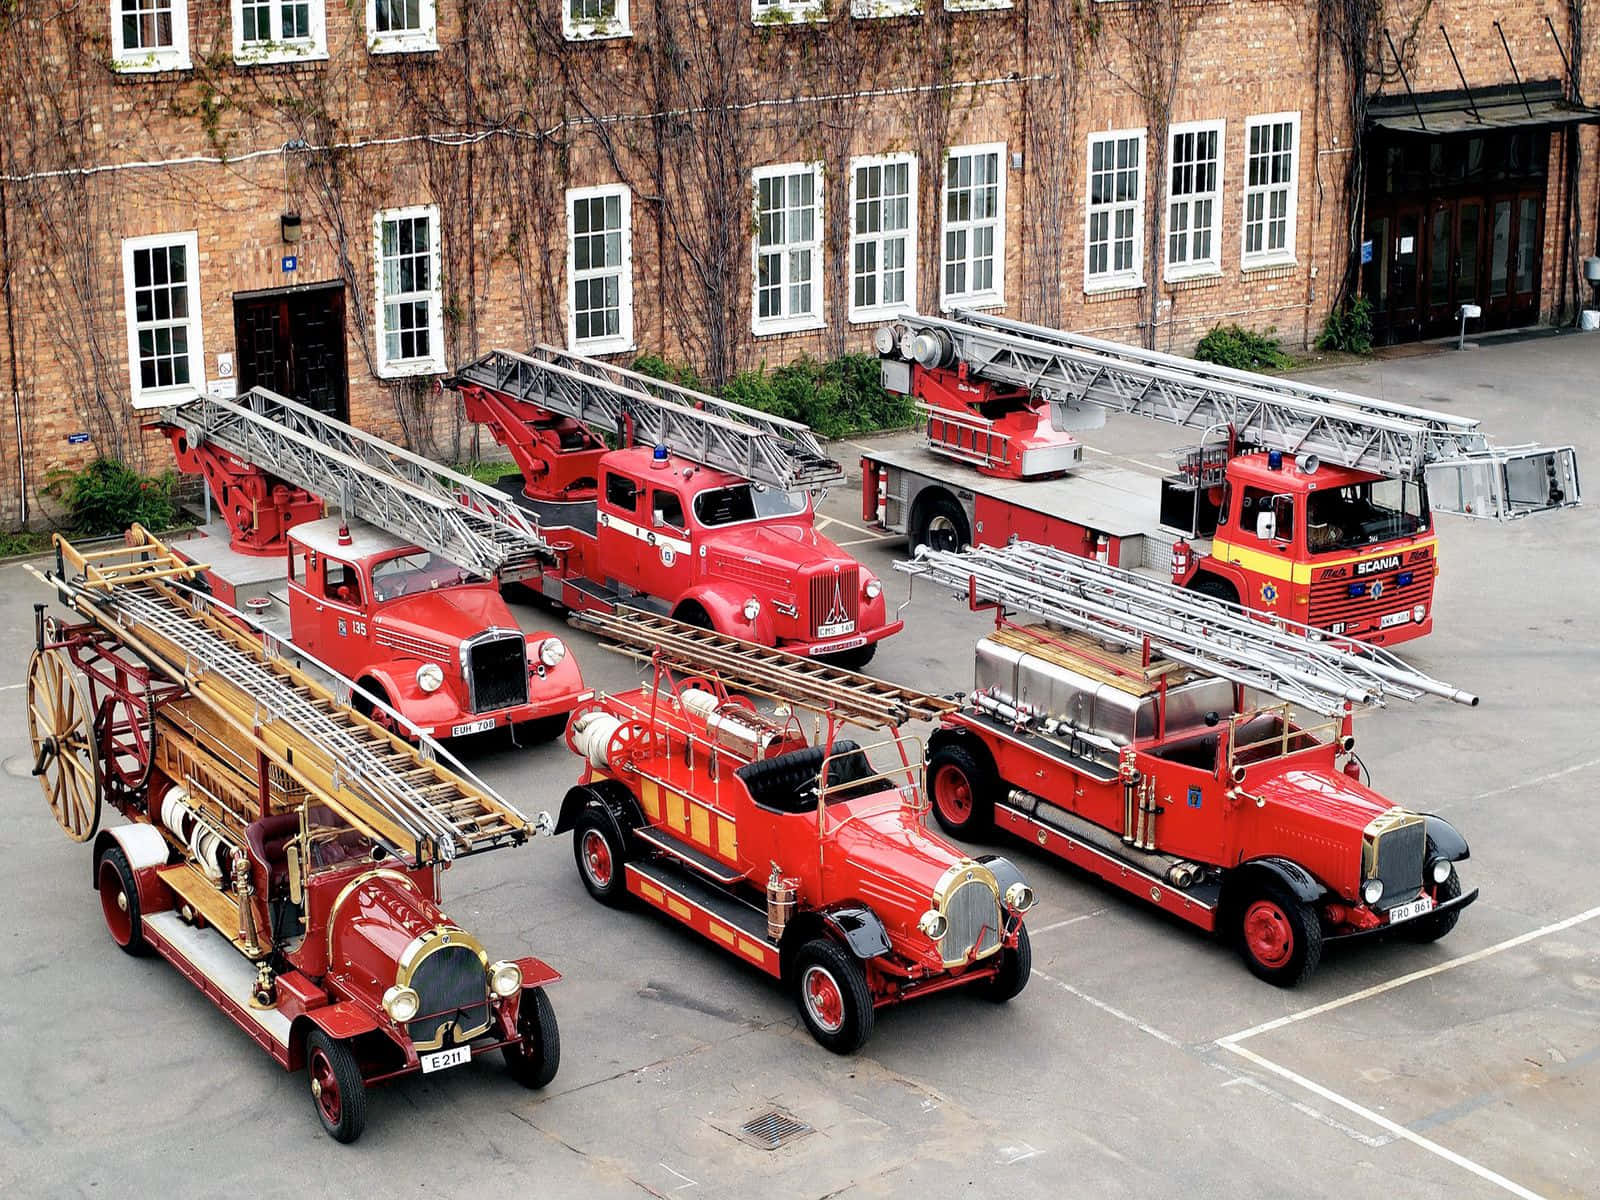 A Group Of Old Fire Trucks Parked In Front Of A Brick Building